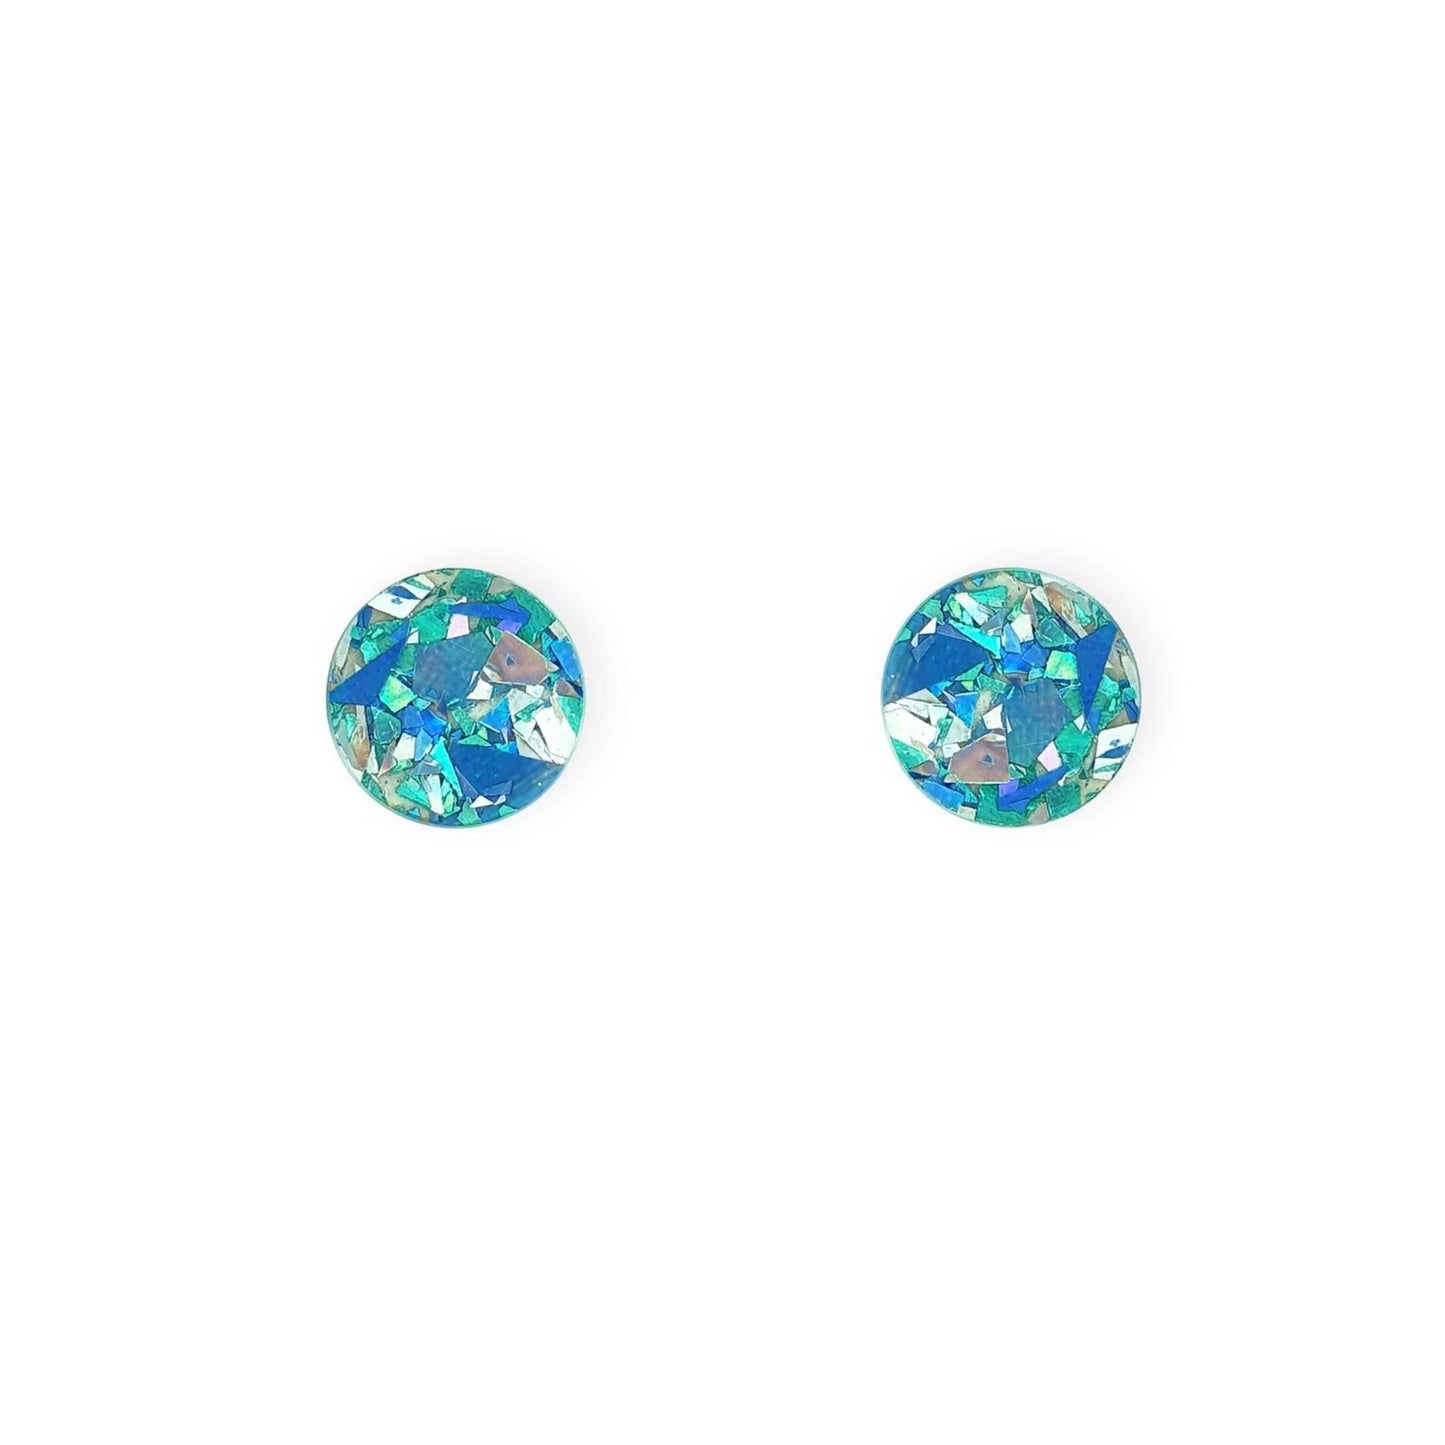 Mini Round Stud Earrings in Ice Blue Sparkle - The Little Jewellery Company